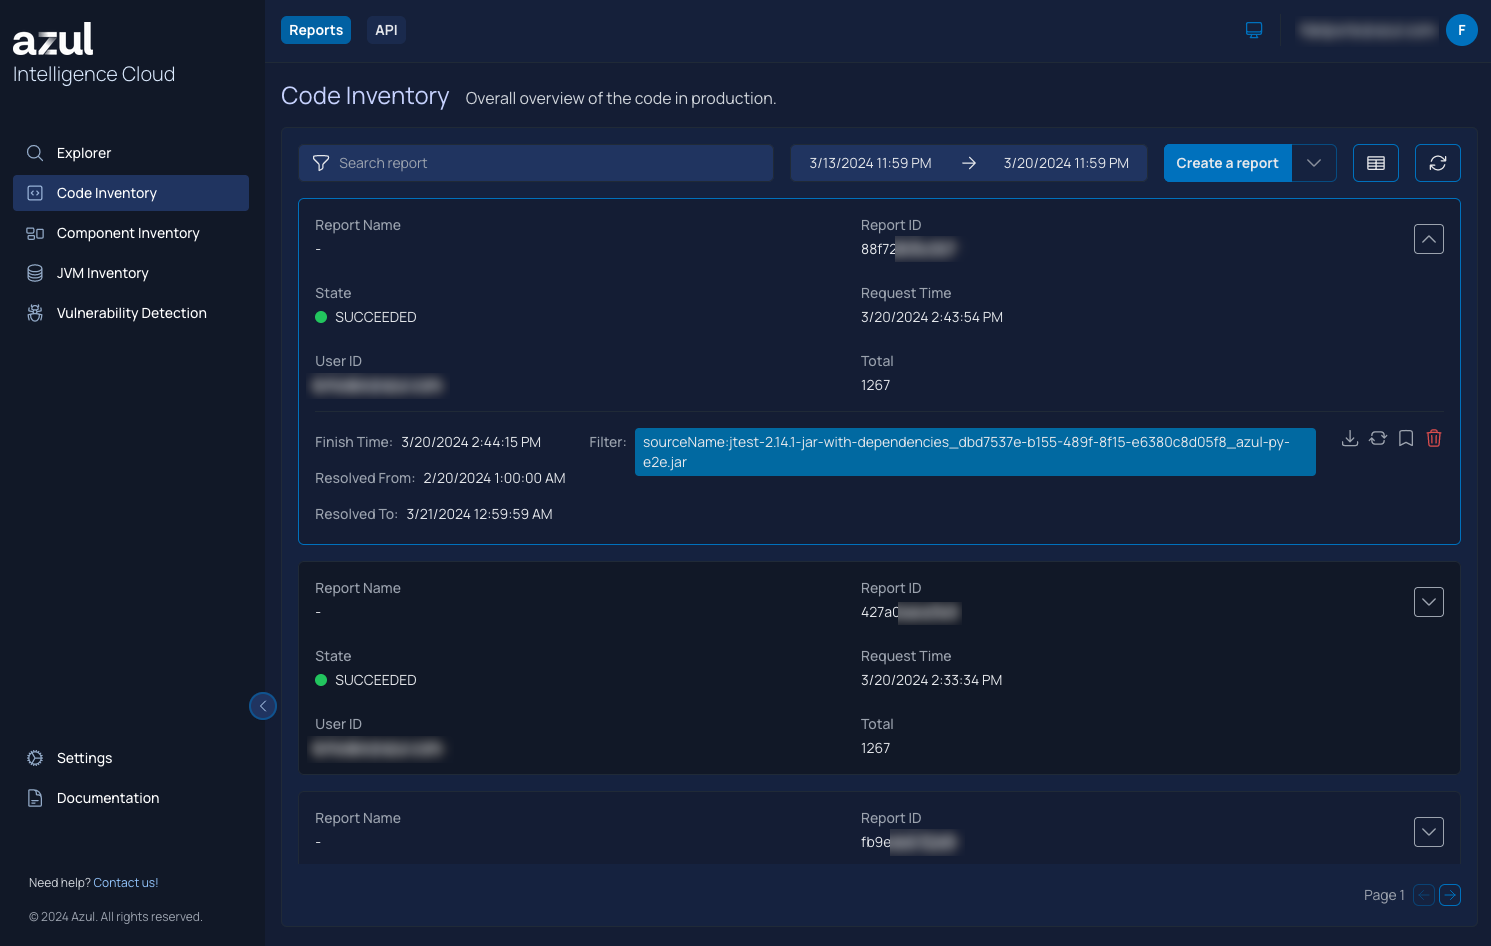 Example of a Code Inventory view in the Azul Intelligence Cloud UI